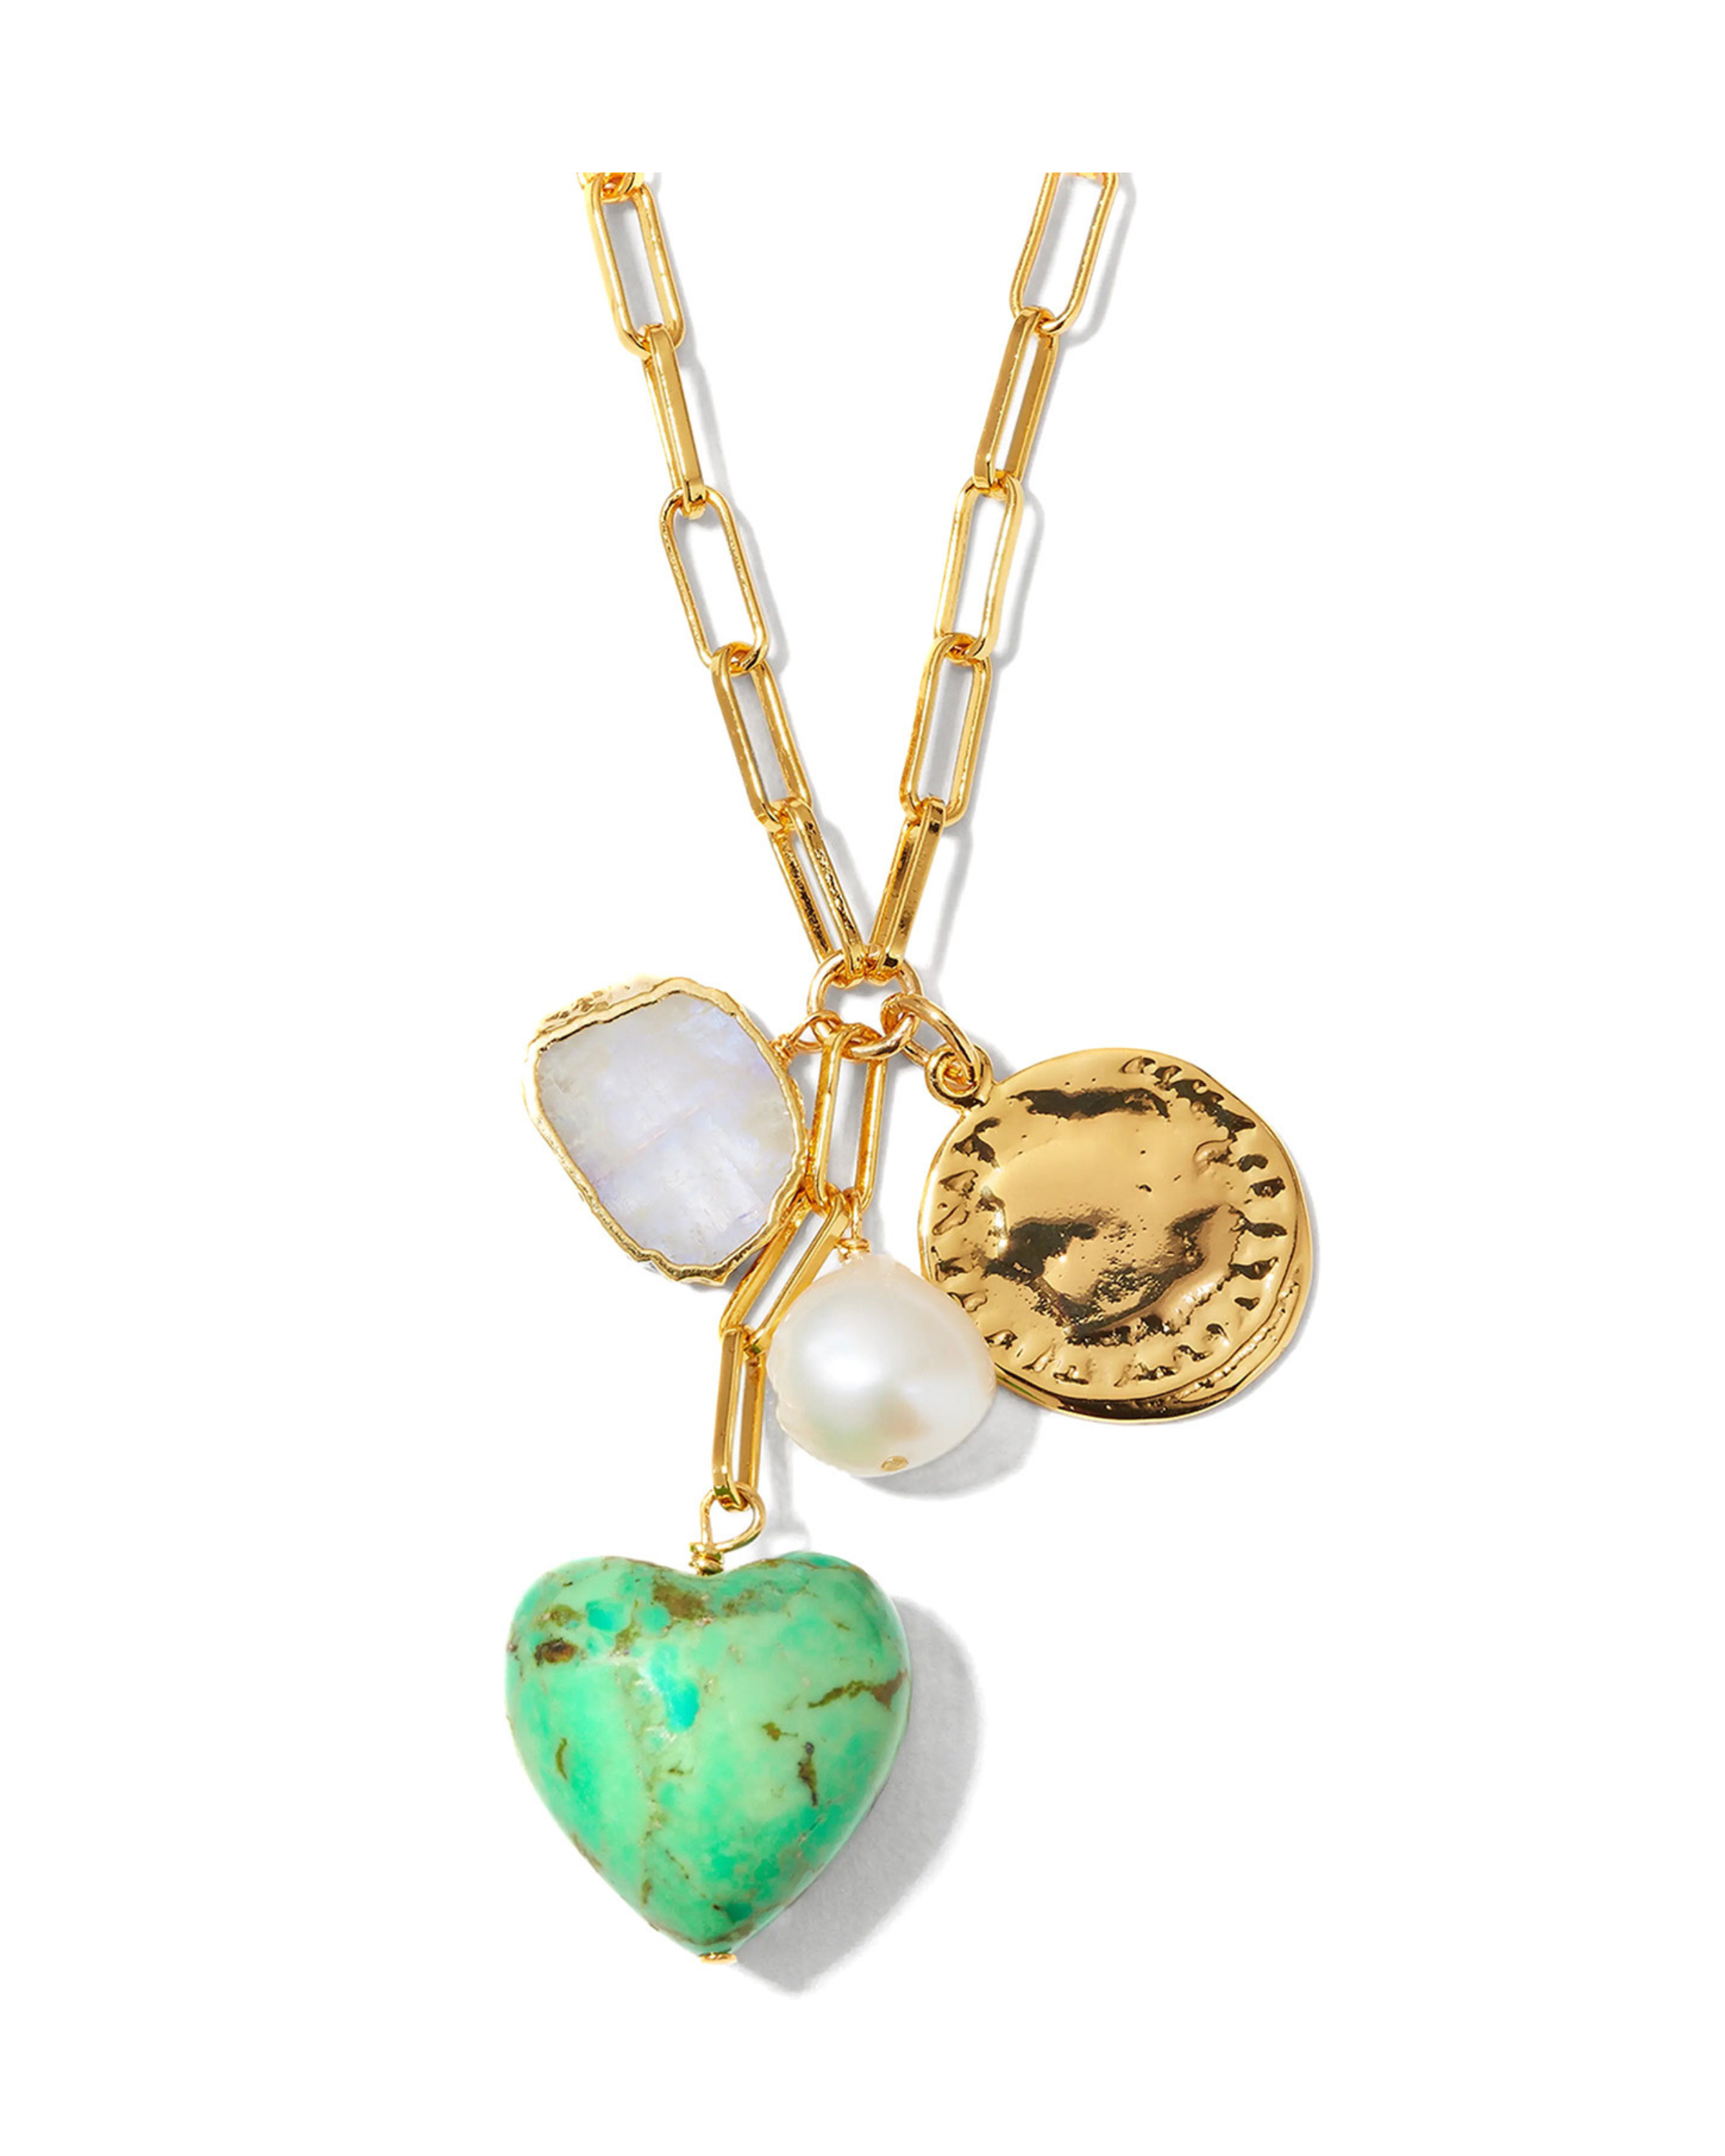 Green Turquoise Heart Charm Necklace